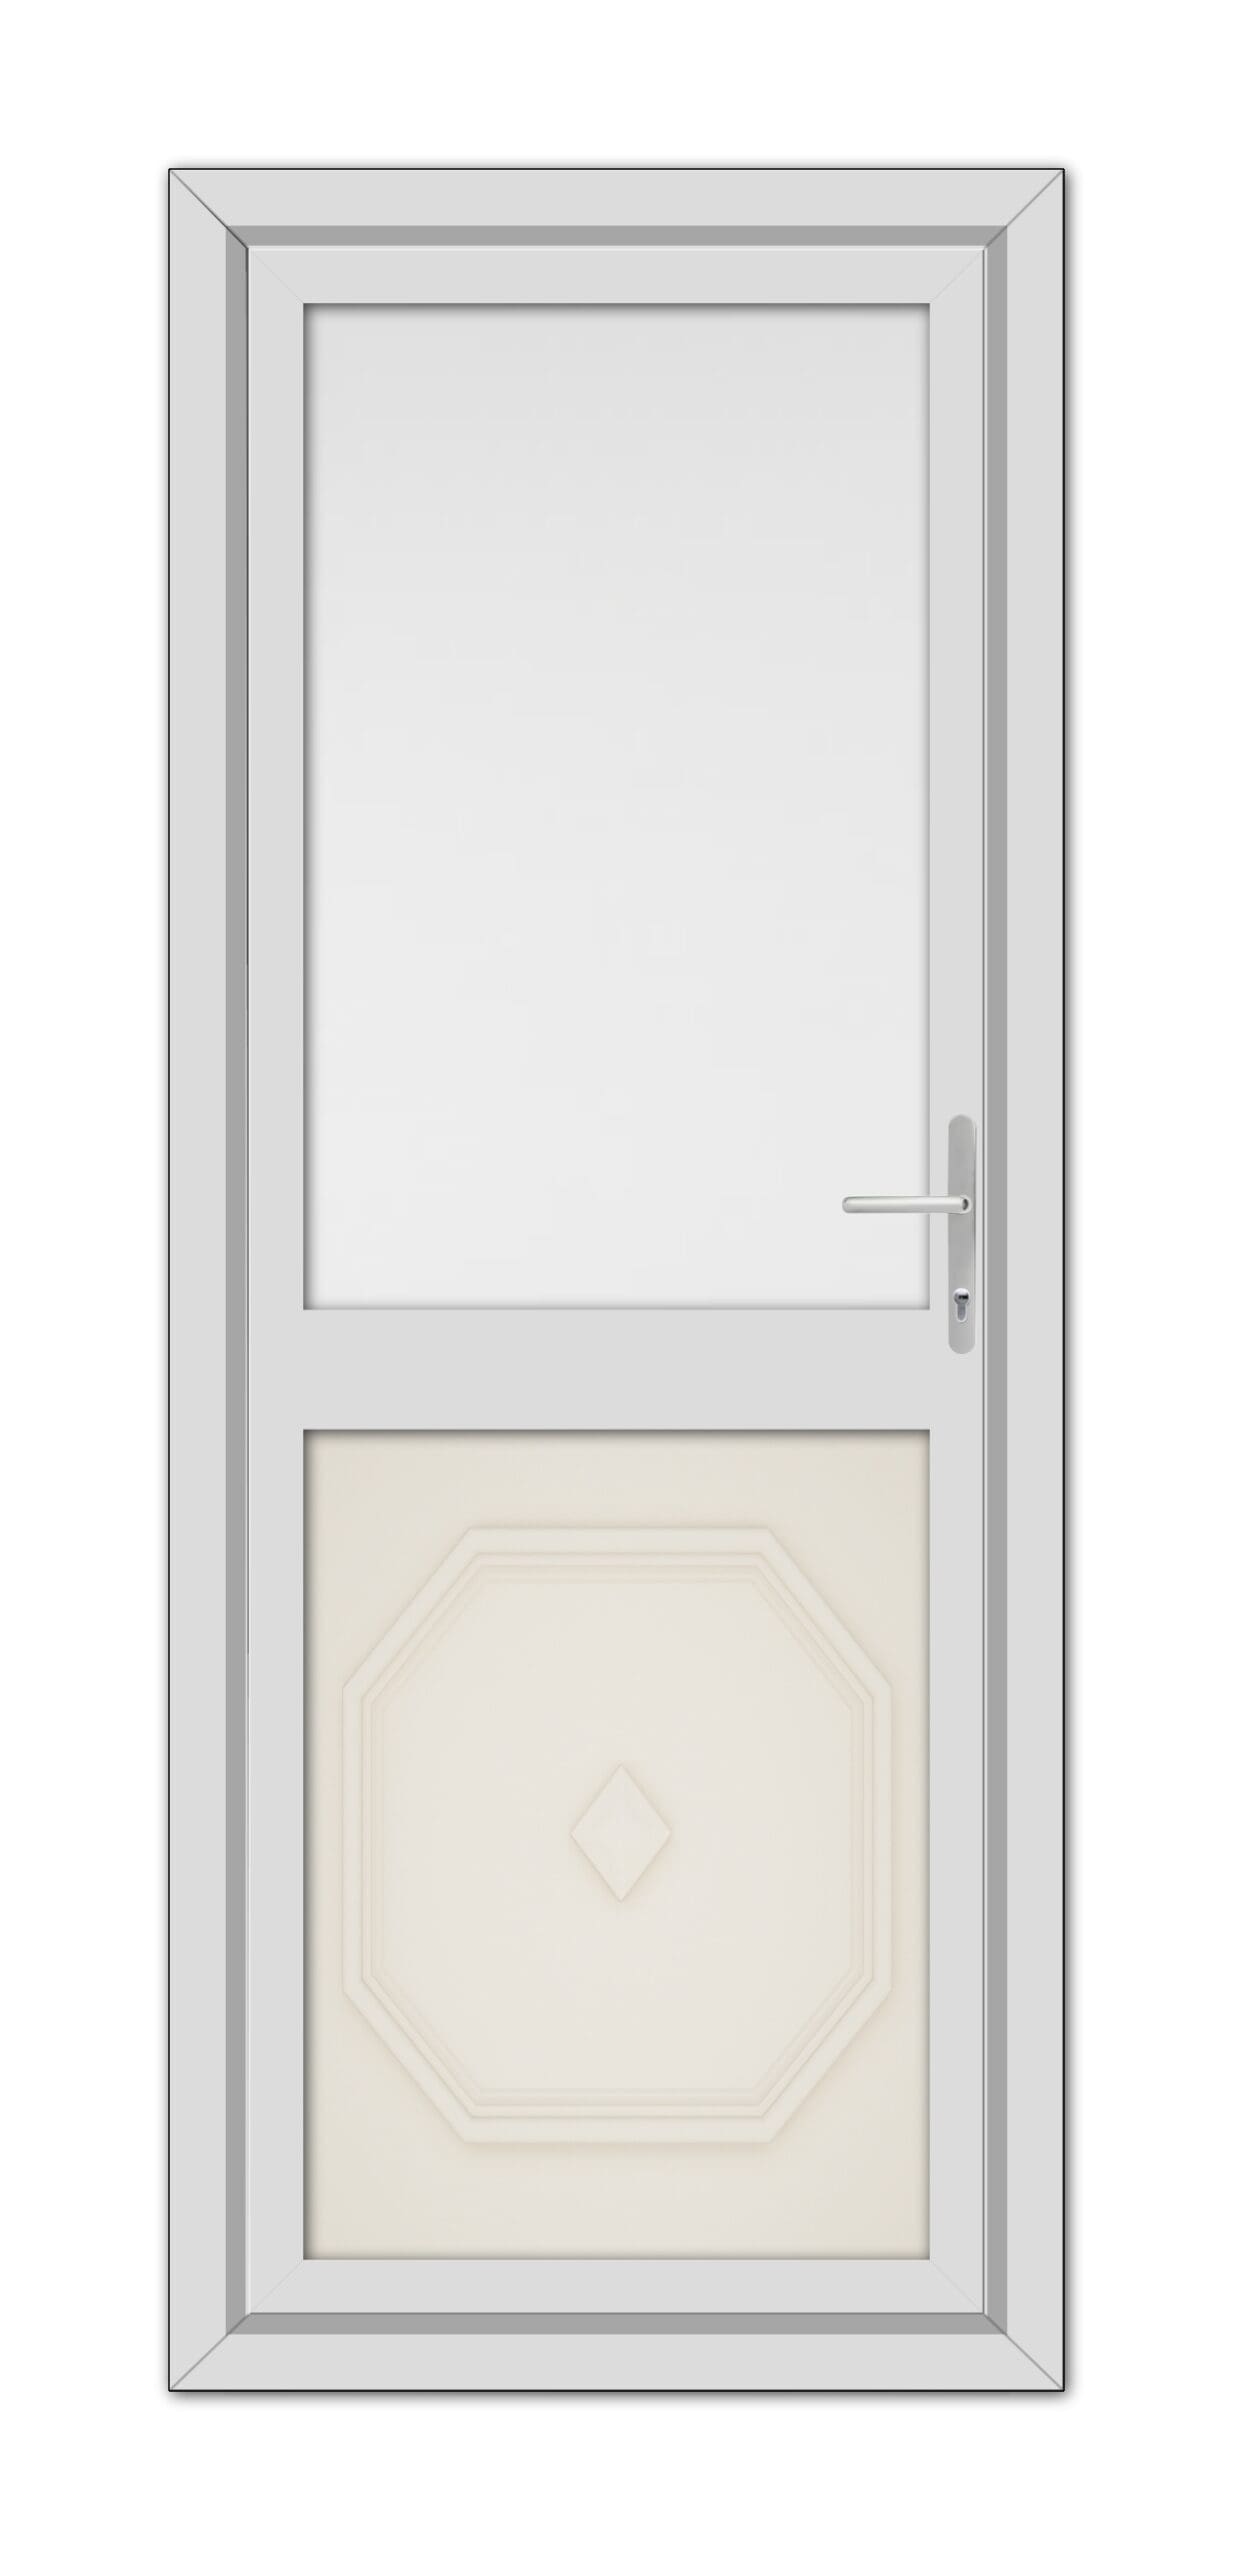 A Cream Westminster Half uPVC Back Door featuring a geometric pattern at the bottom, a large rectangular glass window at the top, and a stainless steel handle on the right.